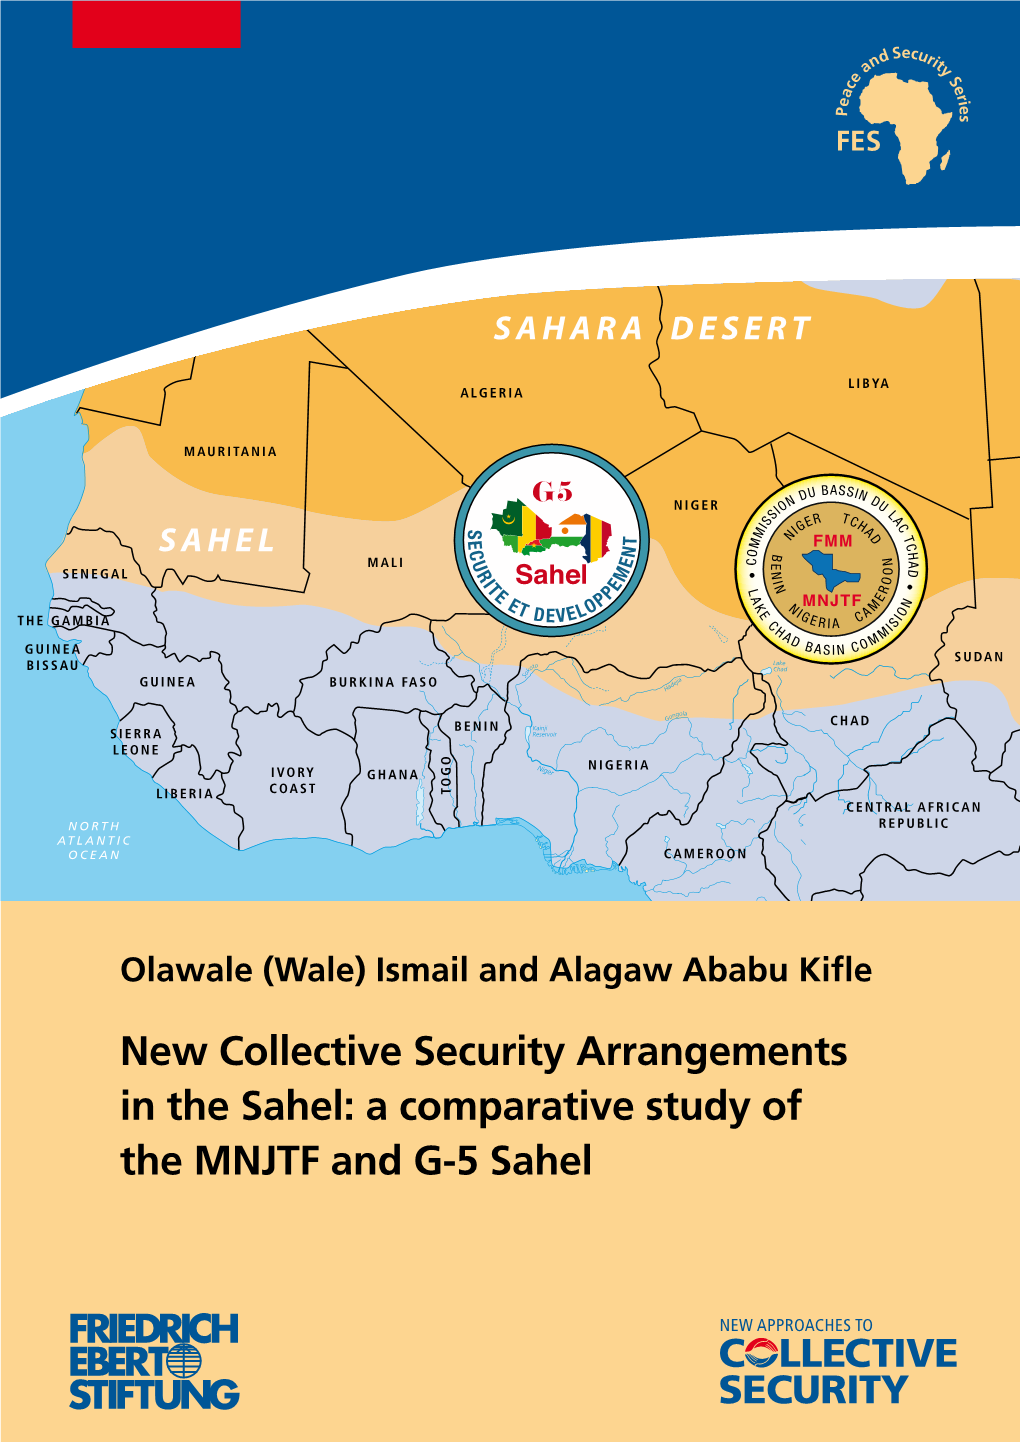 New Collective Security Arrangements in the Sahel: a Comparative Study of the MNJTF and G-5 Sahel